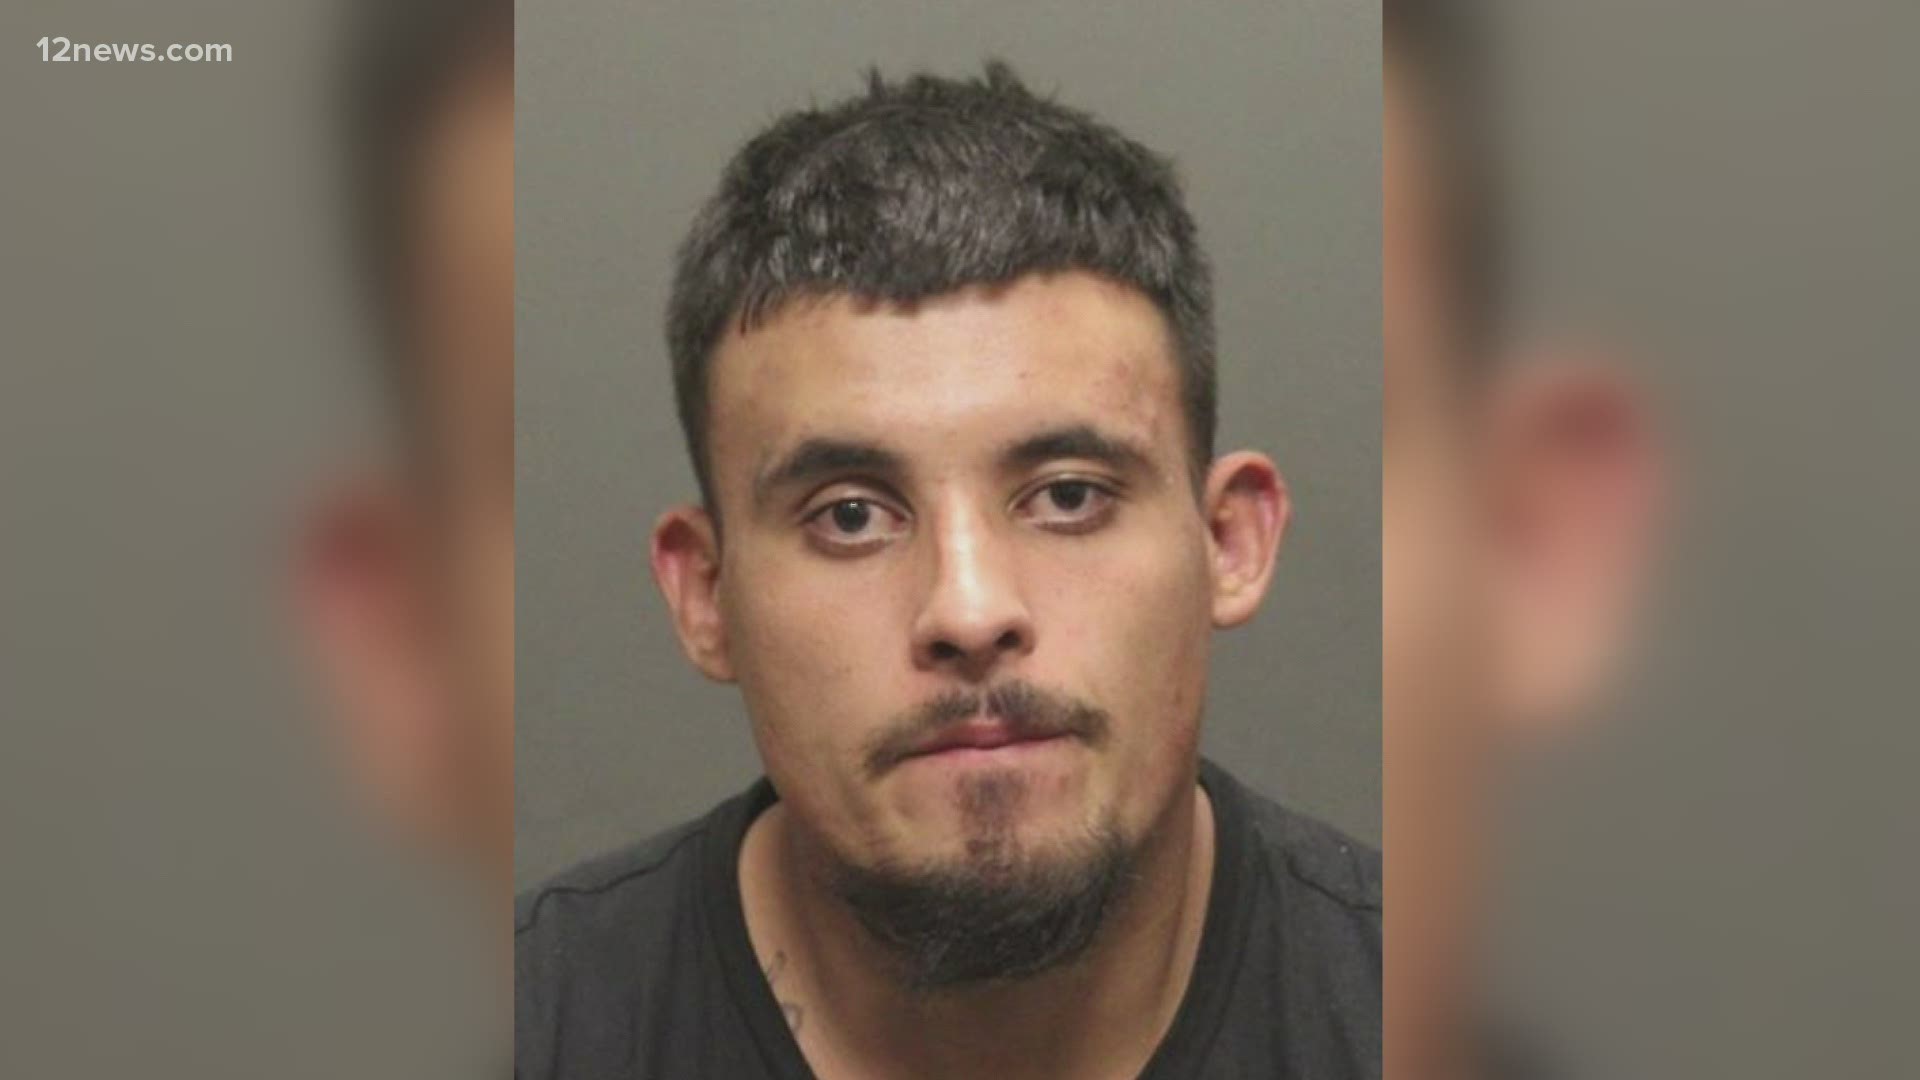 Alberto Sanchez is in jail after leading state troopers on a high-speed chase from south of Phoenix to Tucson. His passenger livestreamed the chase on Facebook.